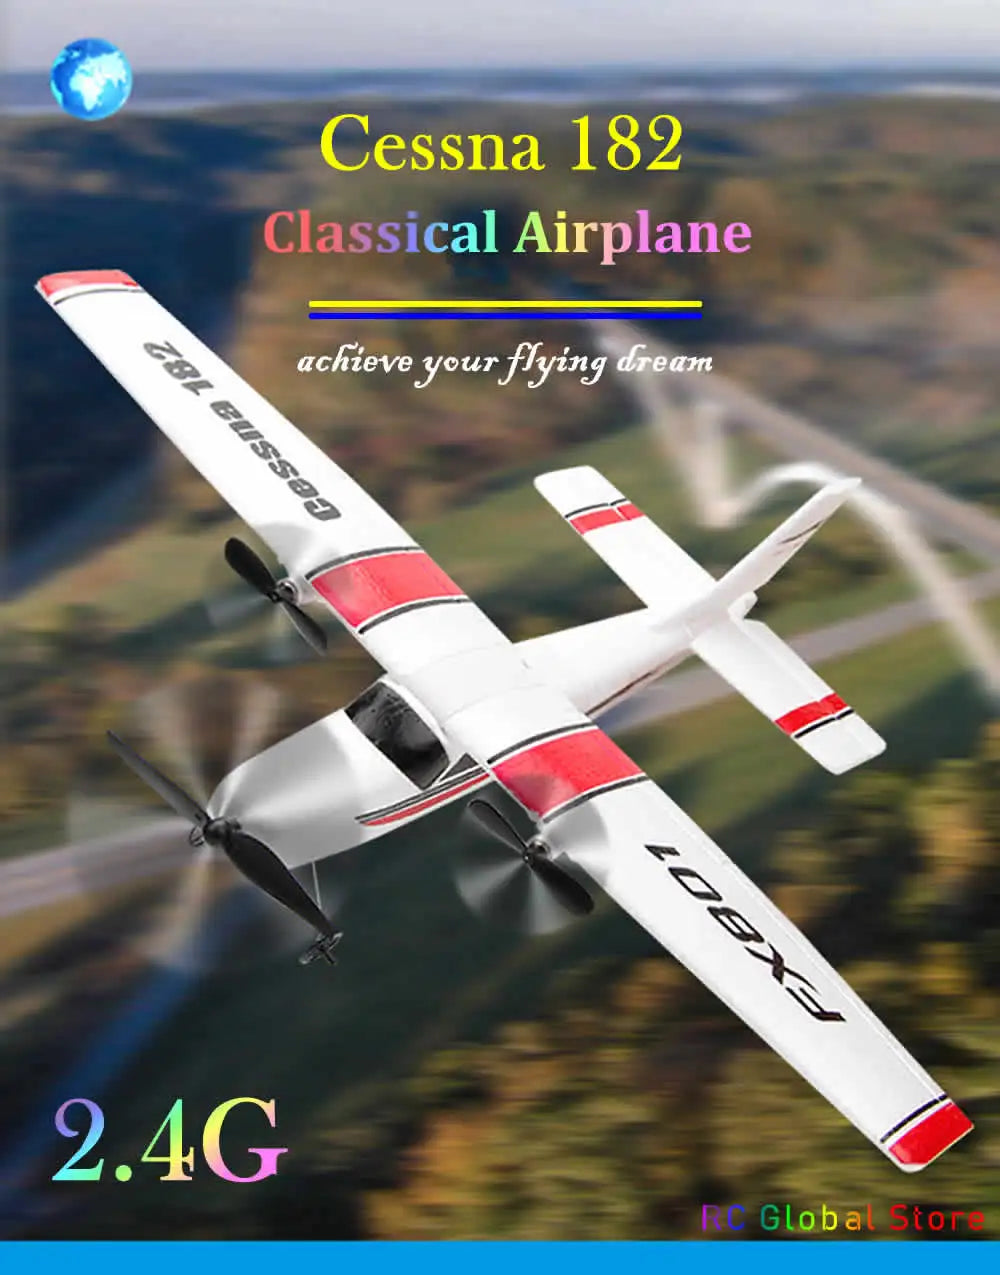 Beginner Electric Airplane, Cessna 182 Classical Airplane achieve your flying dream 2.4G F